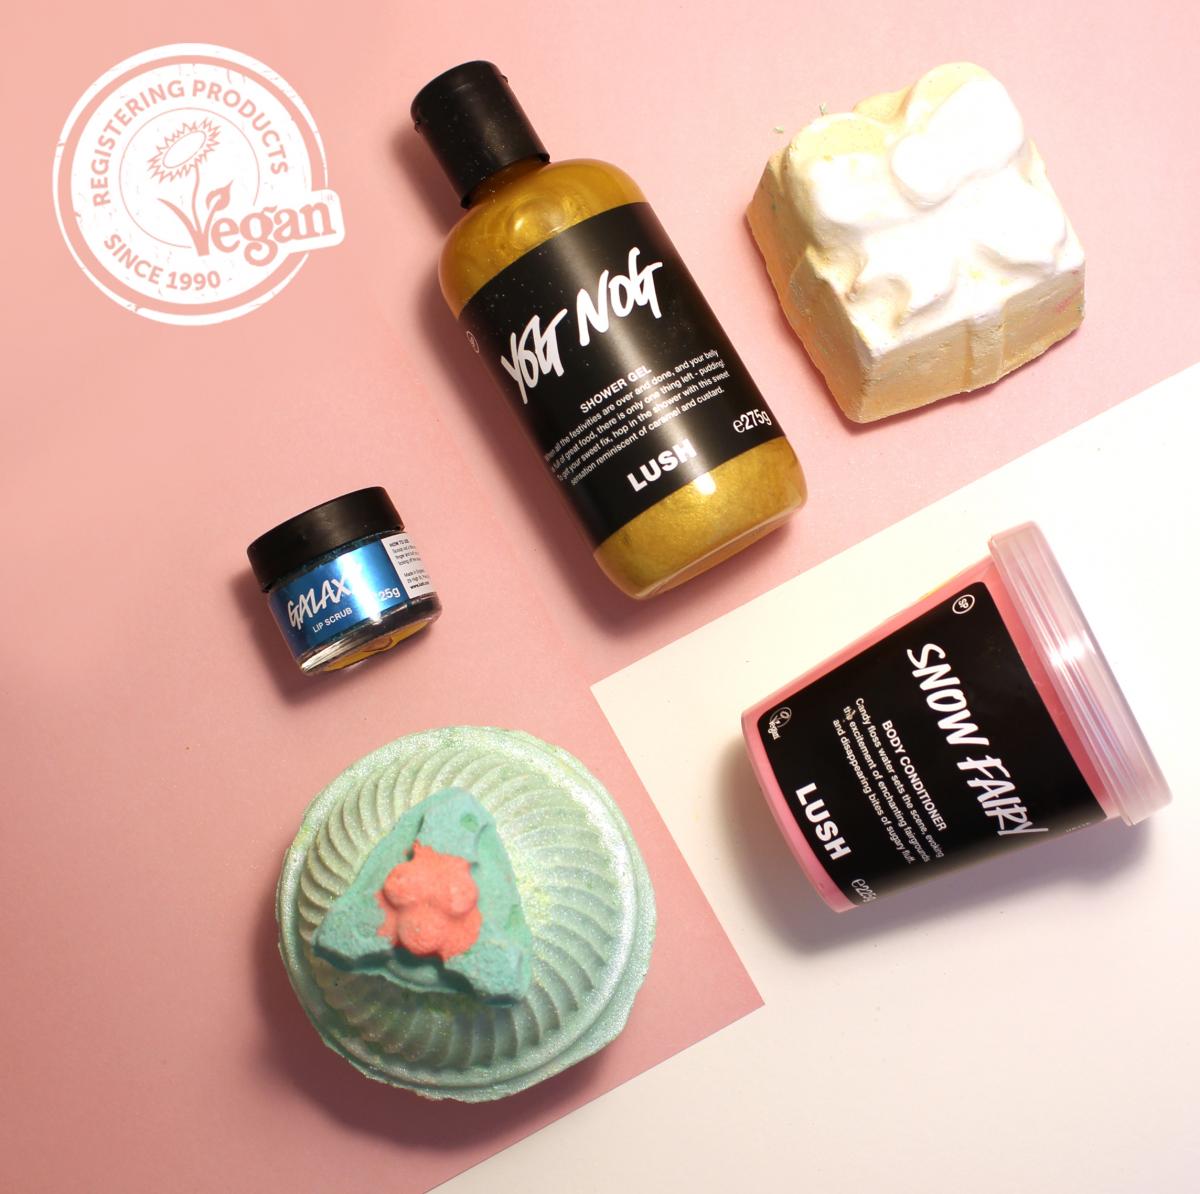 LUSH festive products against a pastel pink background